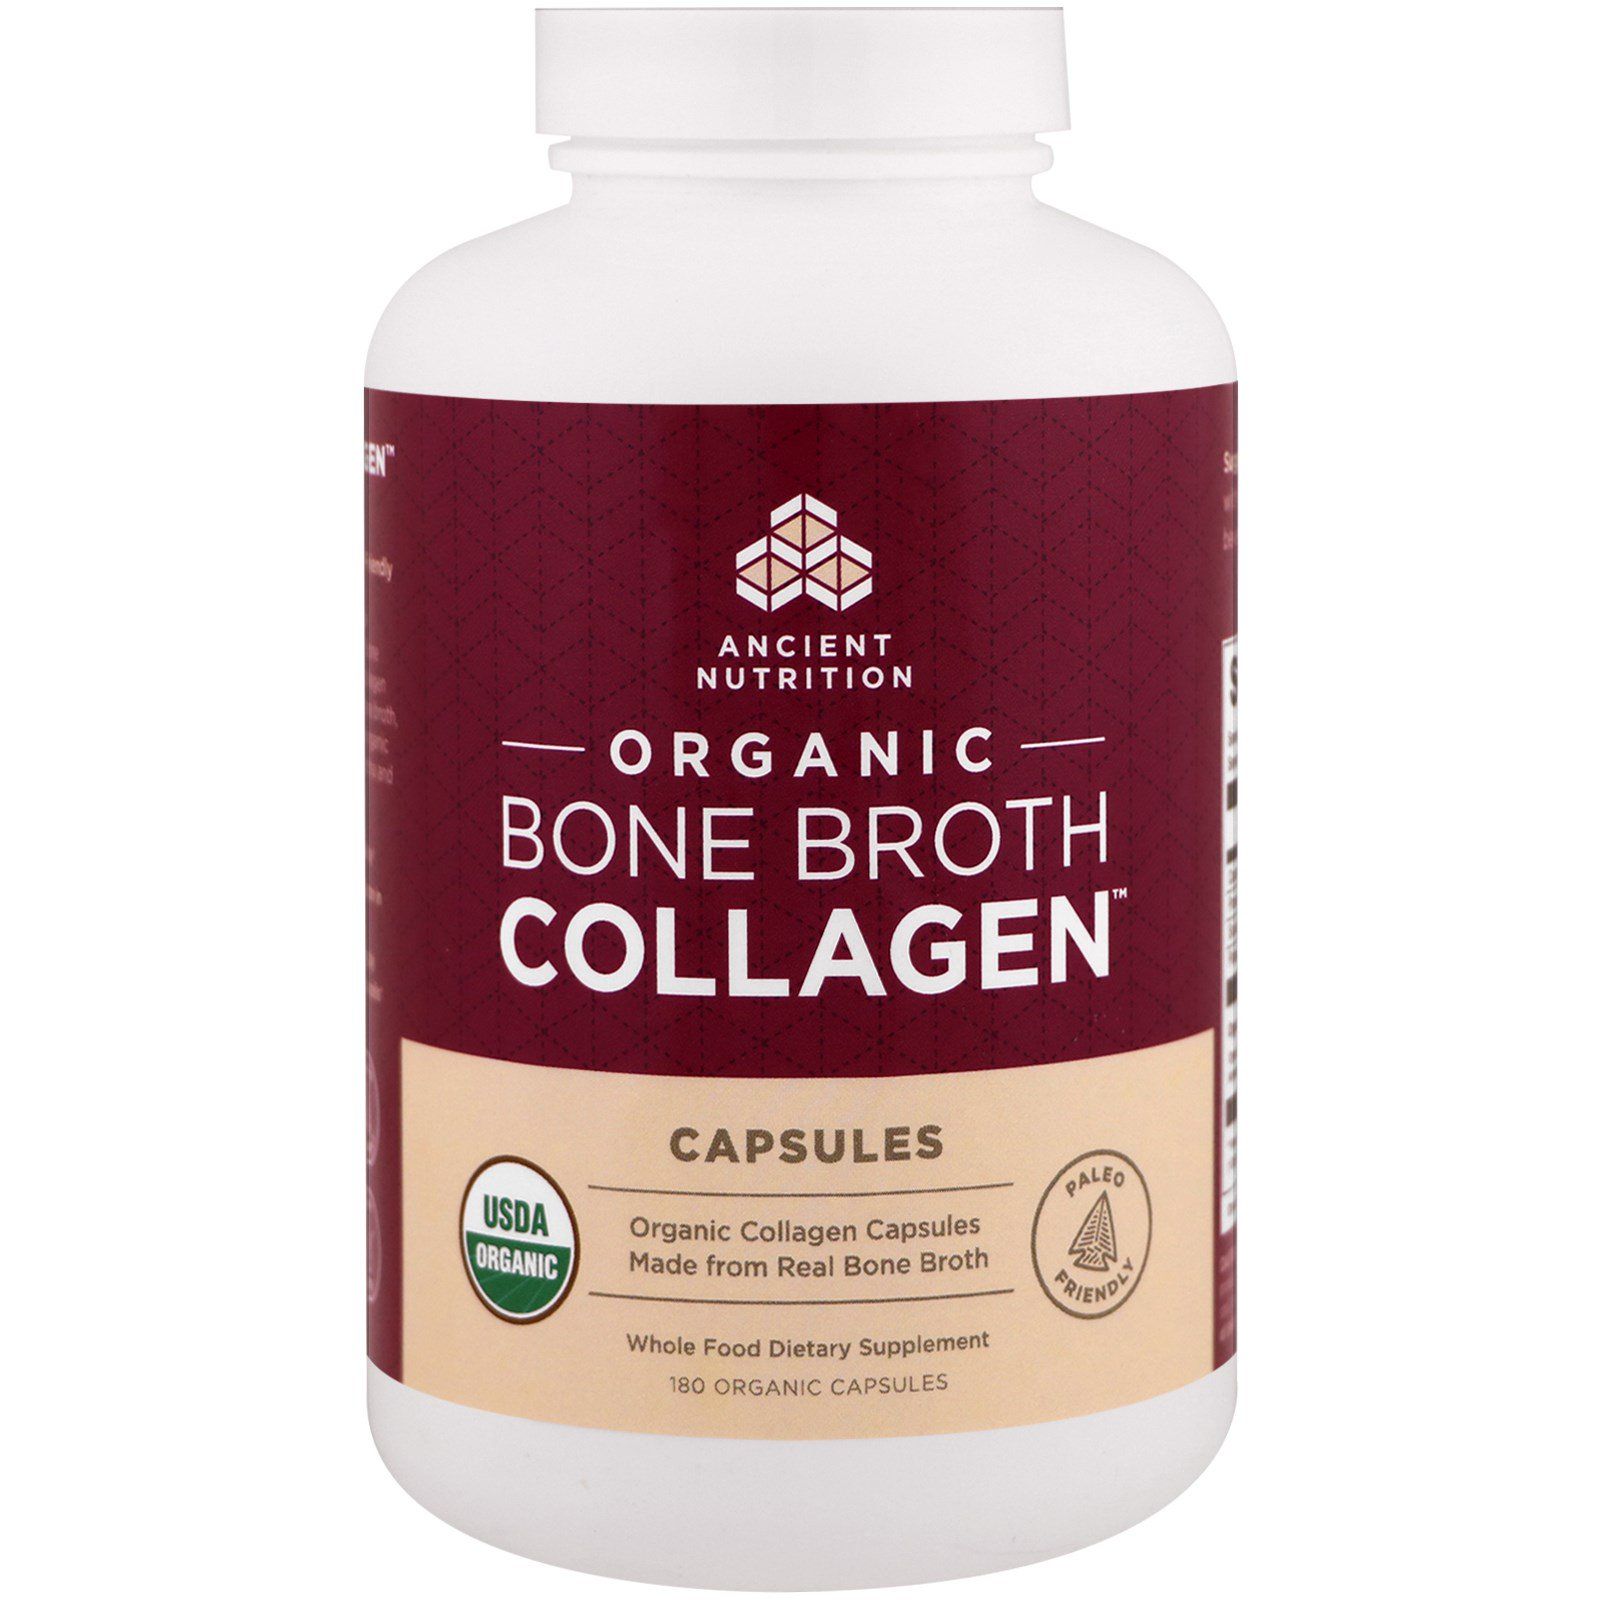 Dr. Axe / Ancient Nutrition, Organic Bone Broth Collagen, 180 Capsules | iHerb